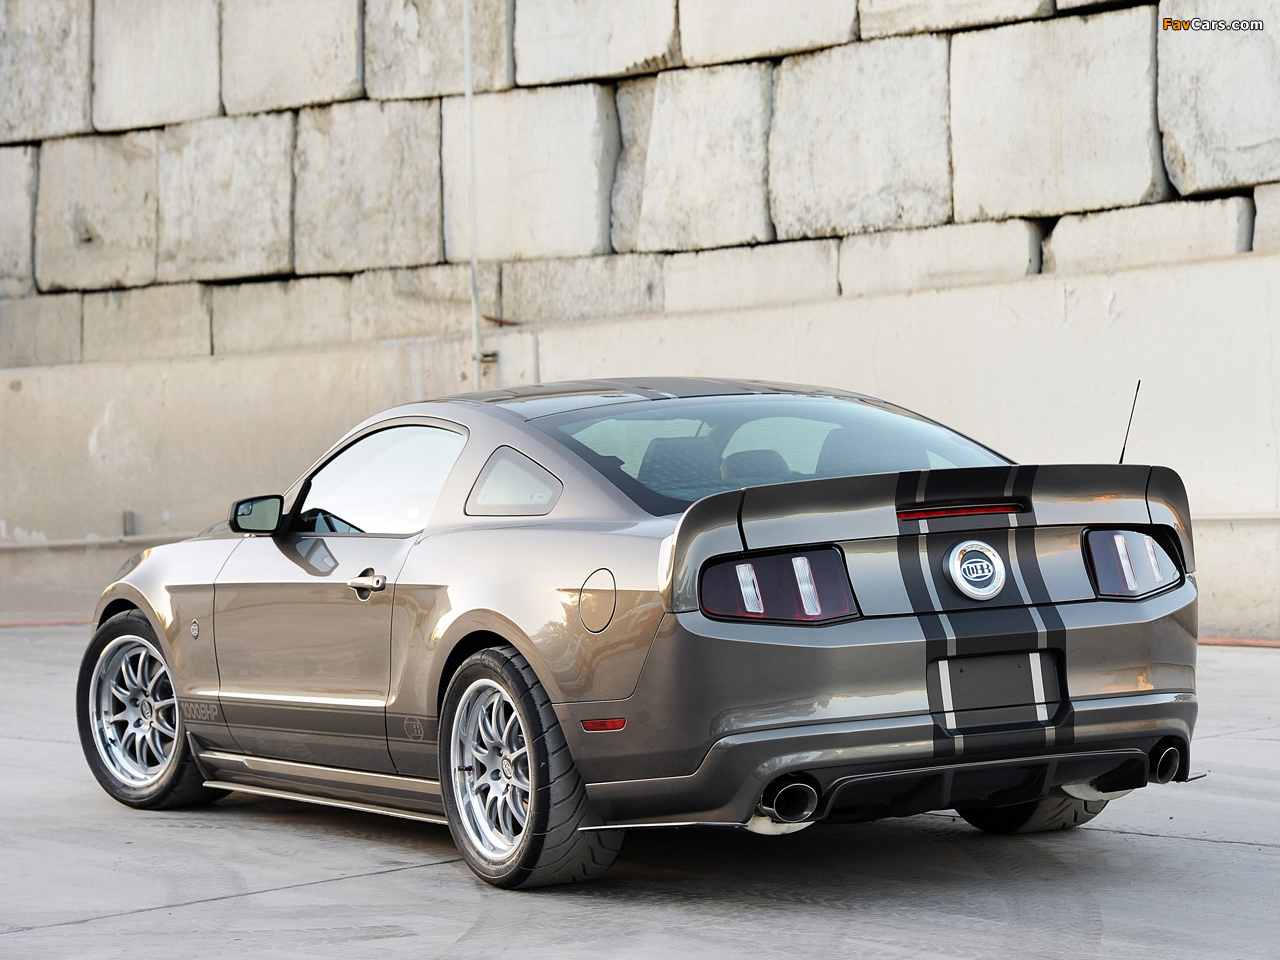 UBB 1000 HP Mustang 2012 pictures (1280 x 960)